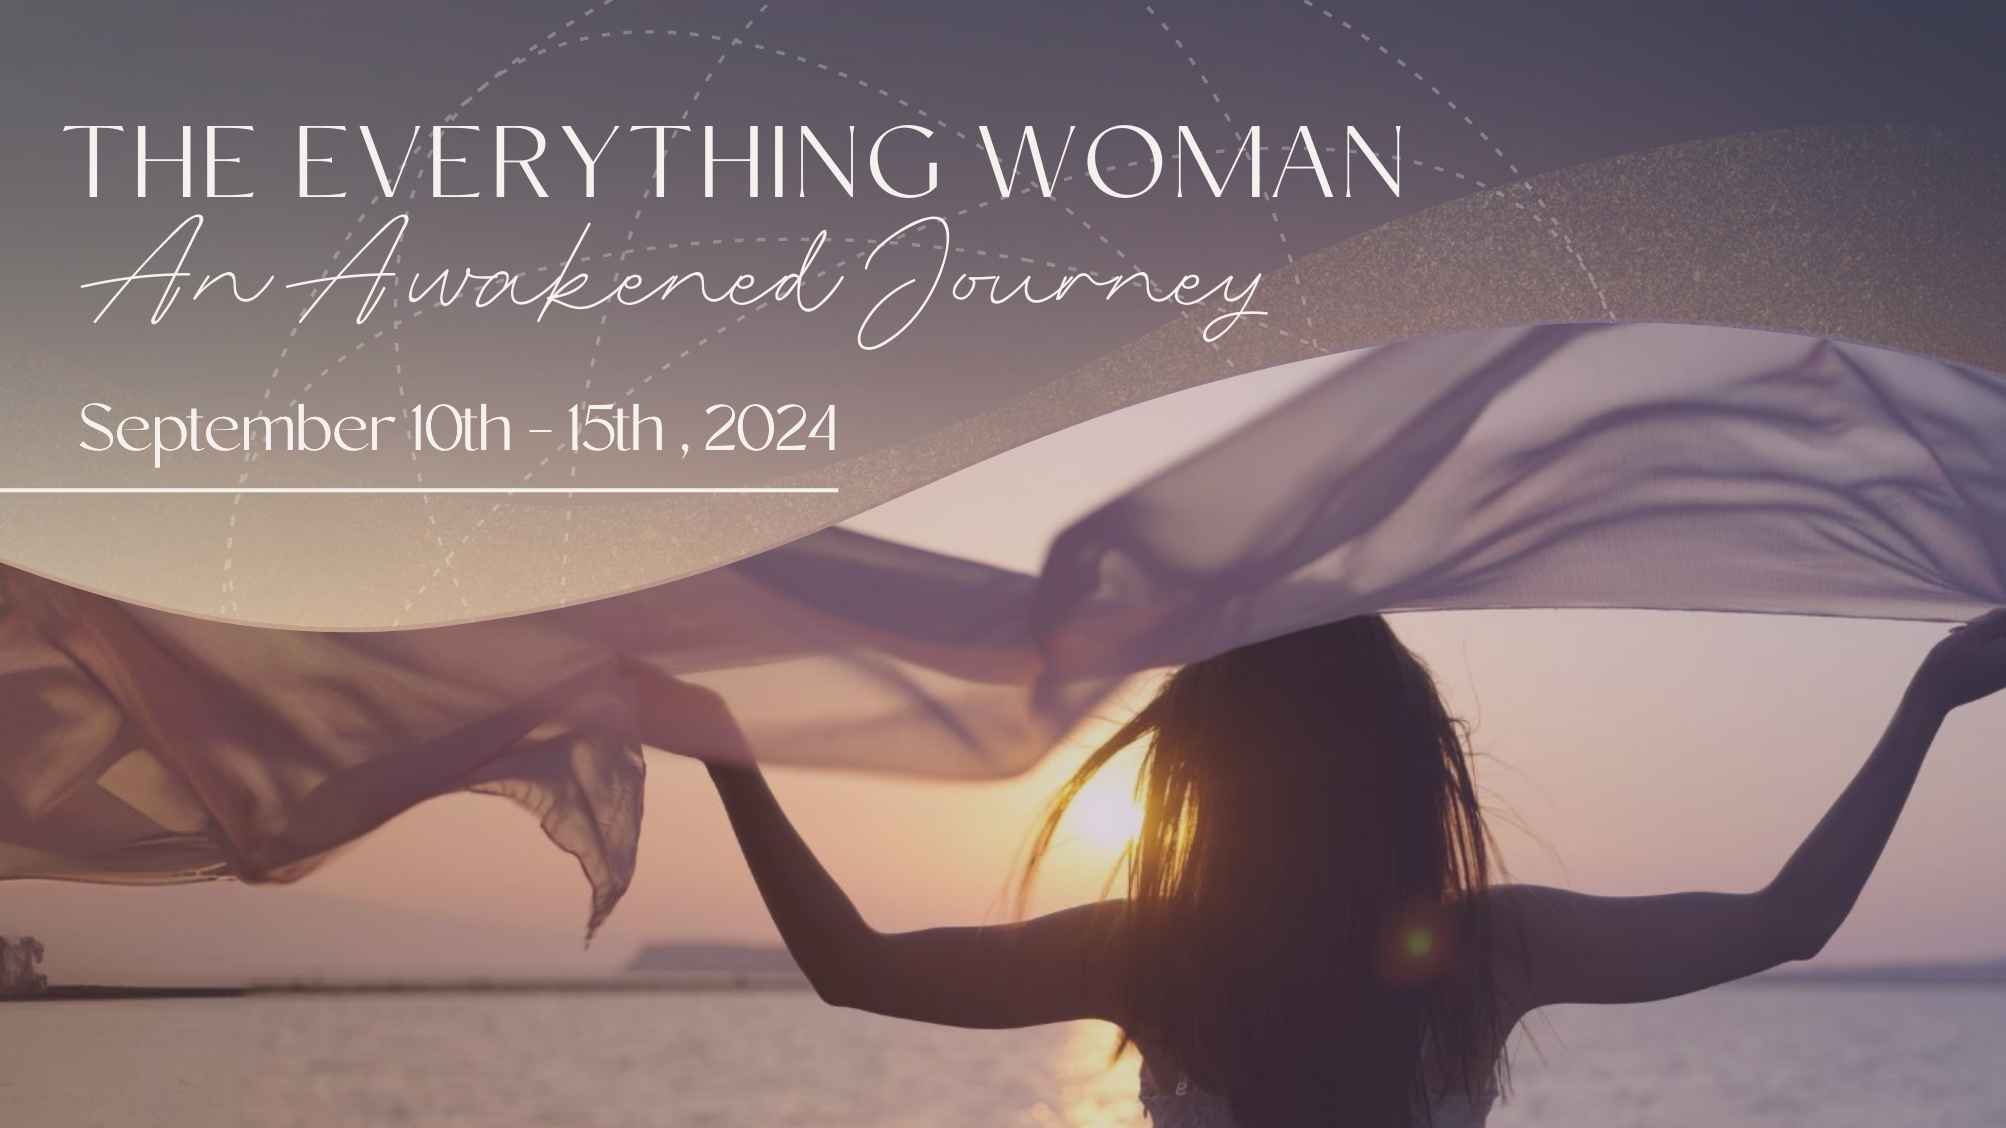 The Everything Woman: An Awakened Journey with Serena Skinner